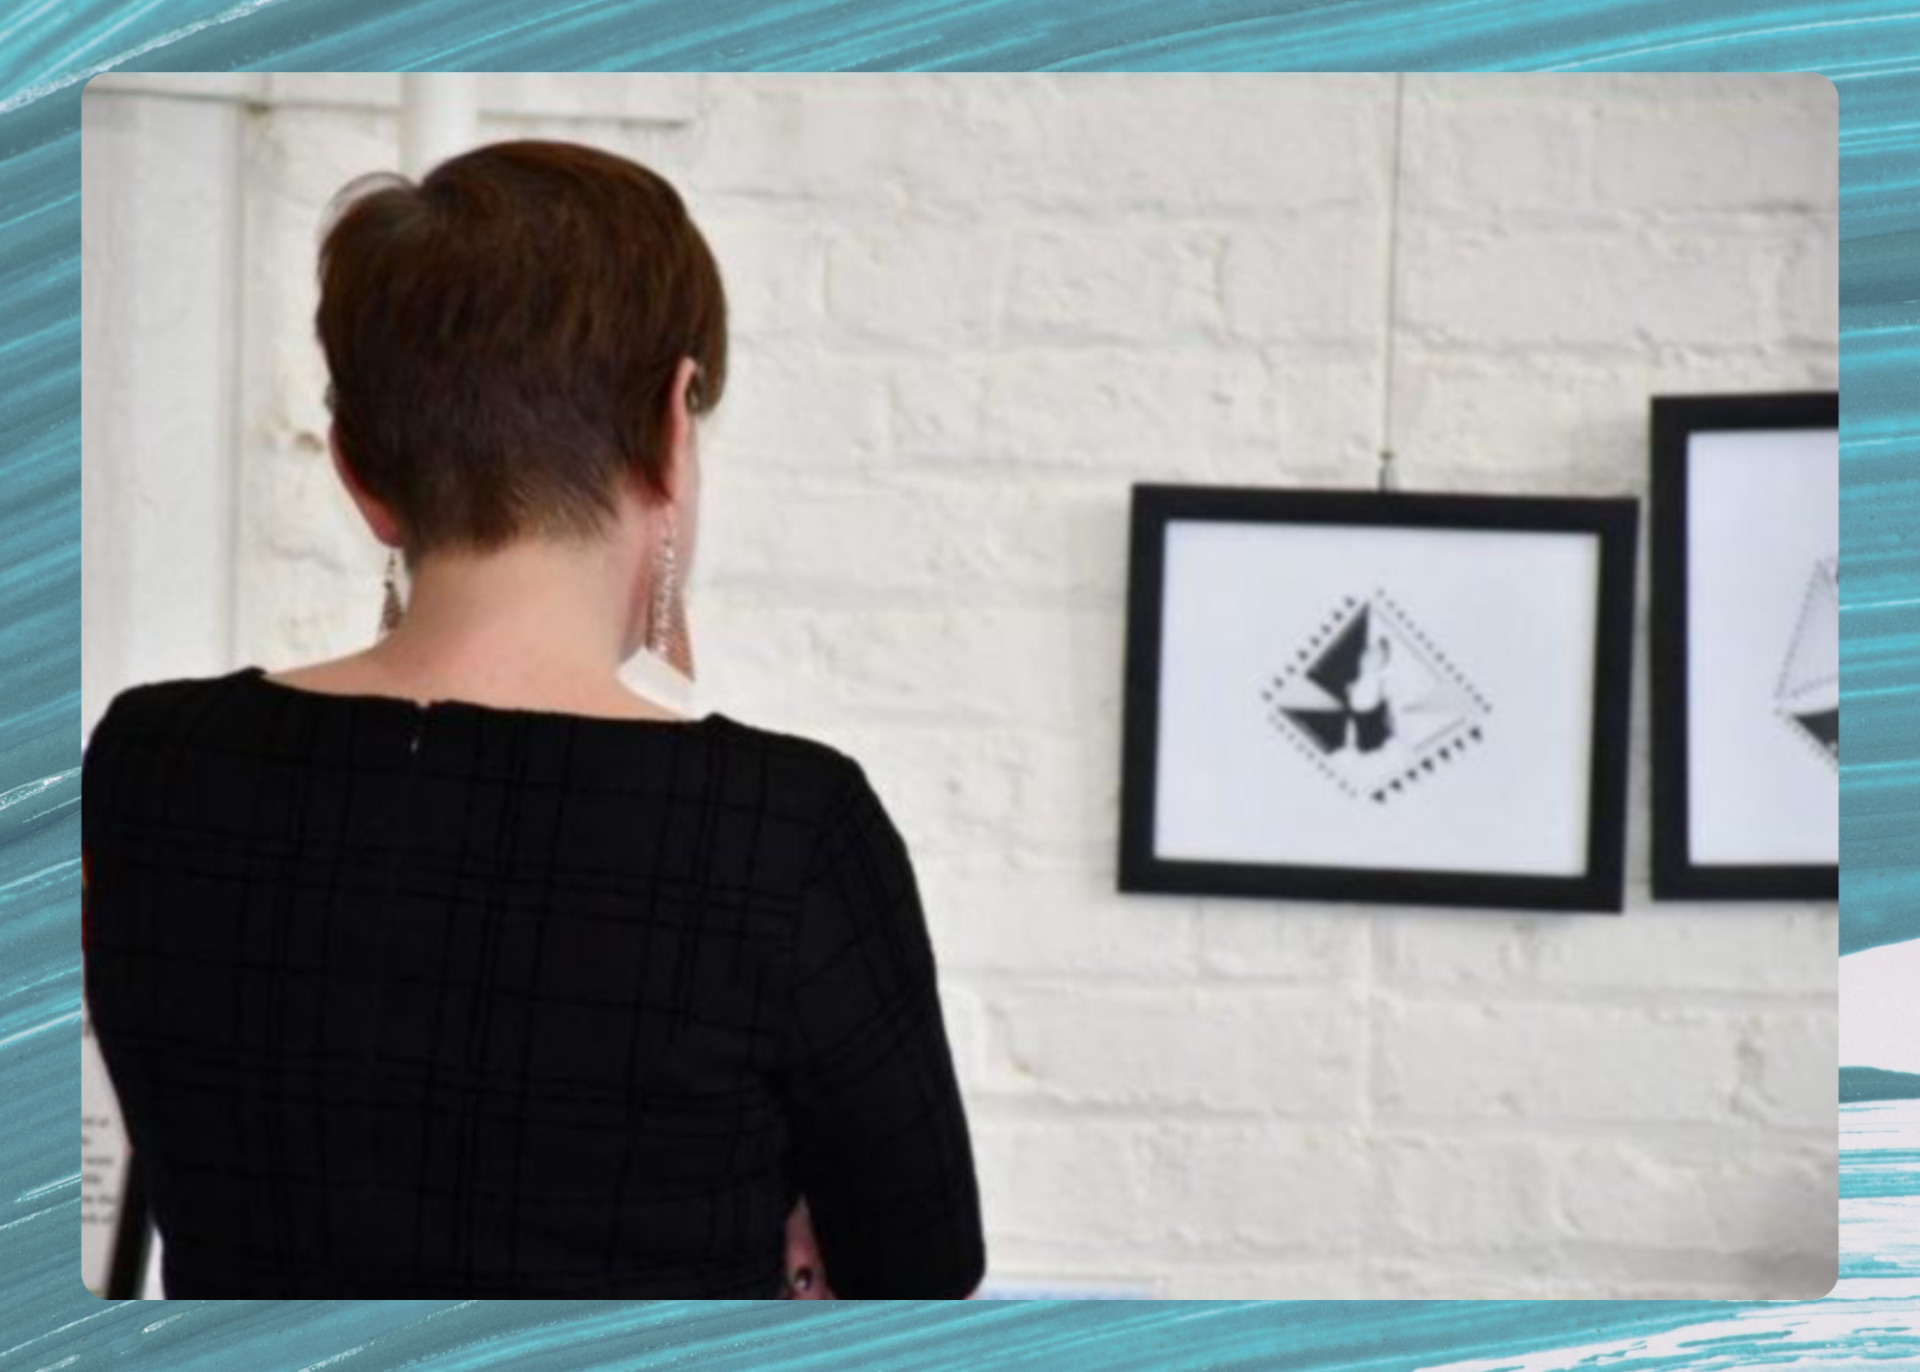 a short haired person looks at artwork on the wall